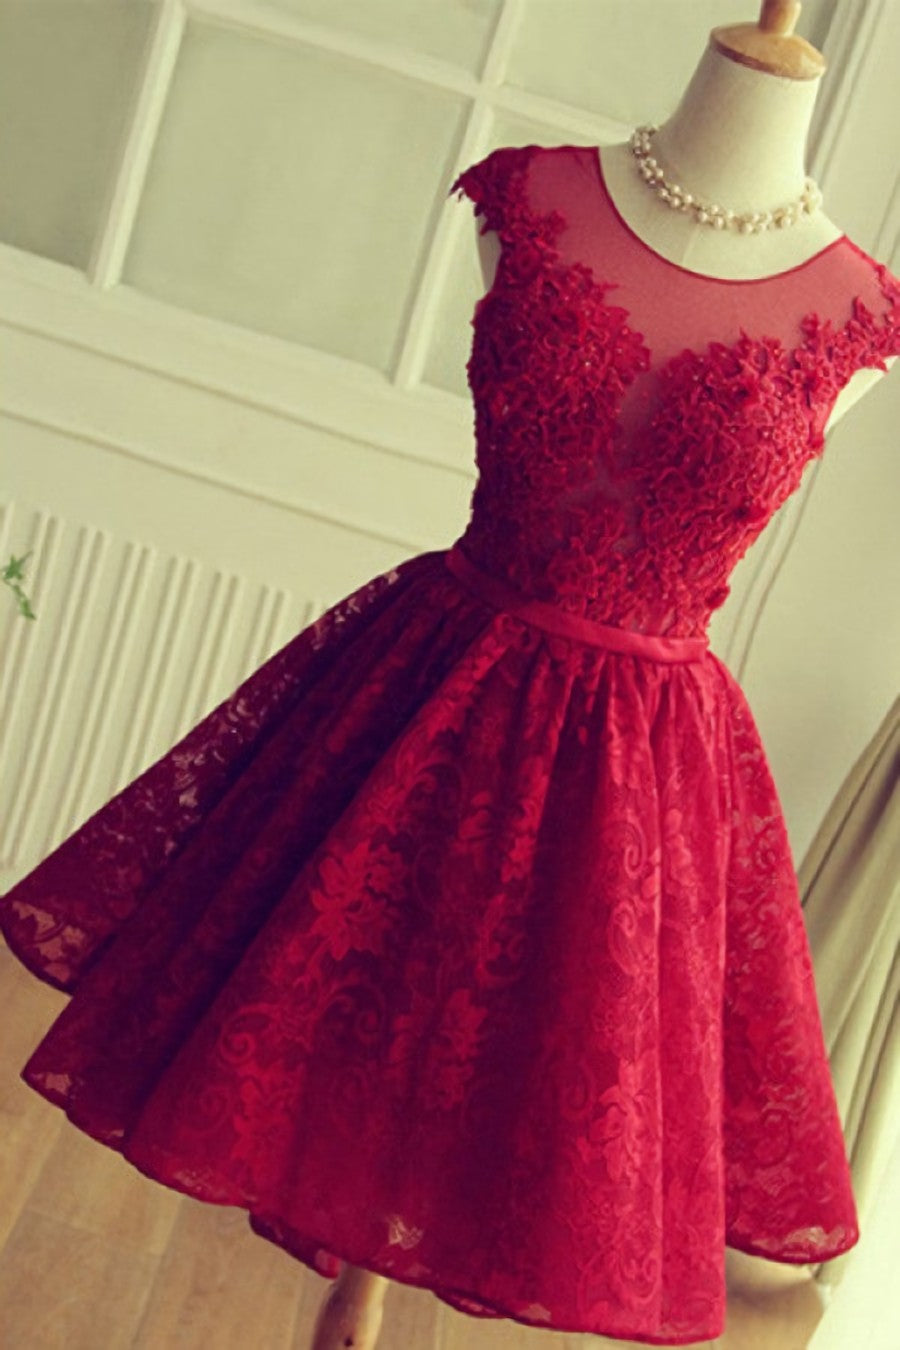 Prom Dress 2030, Red Short Lace Homecoming Dresses,Knee-length Prom Dress,Party Gown